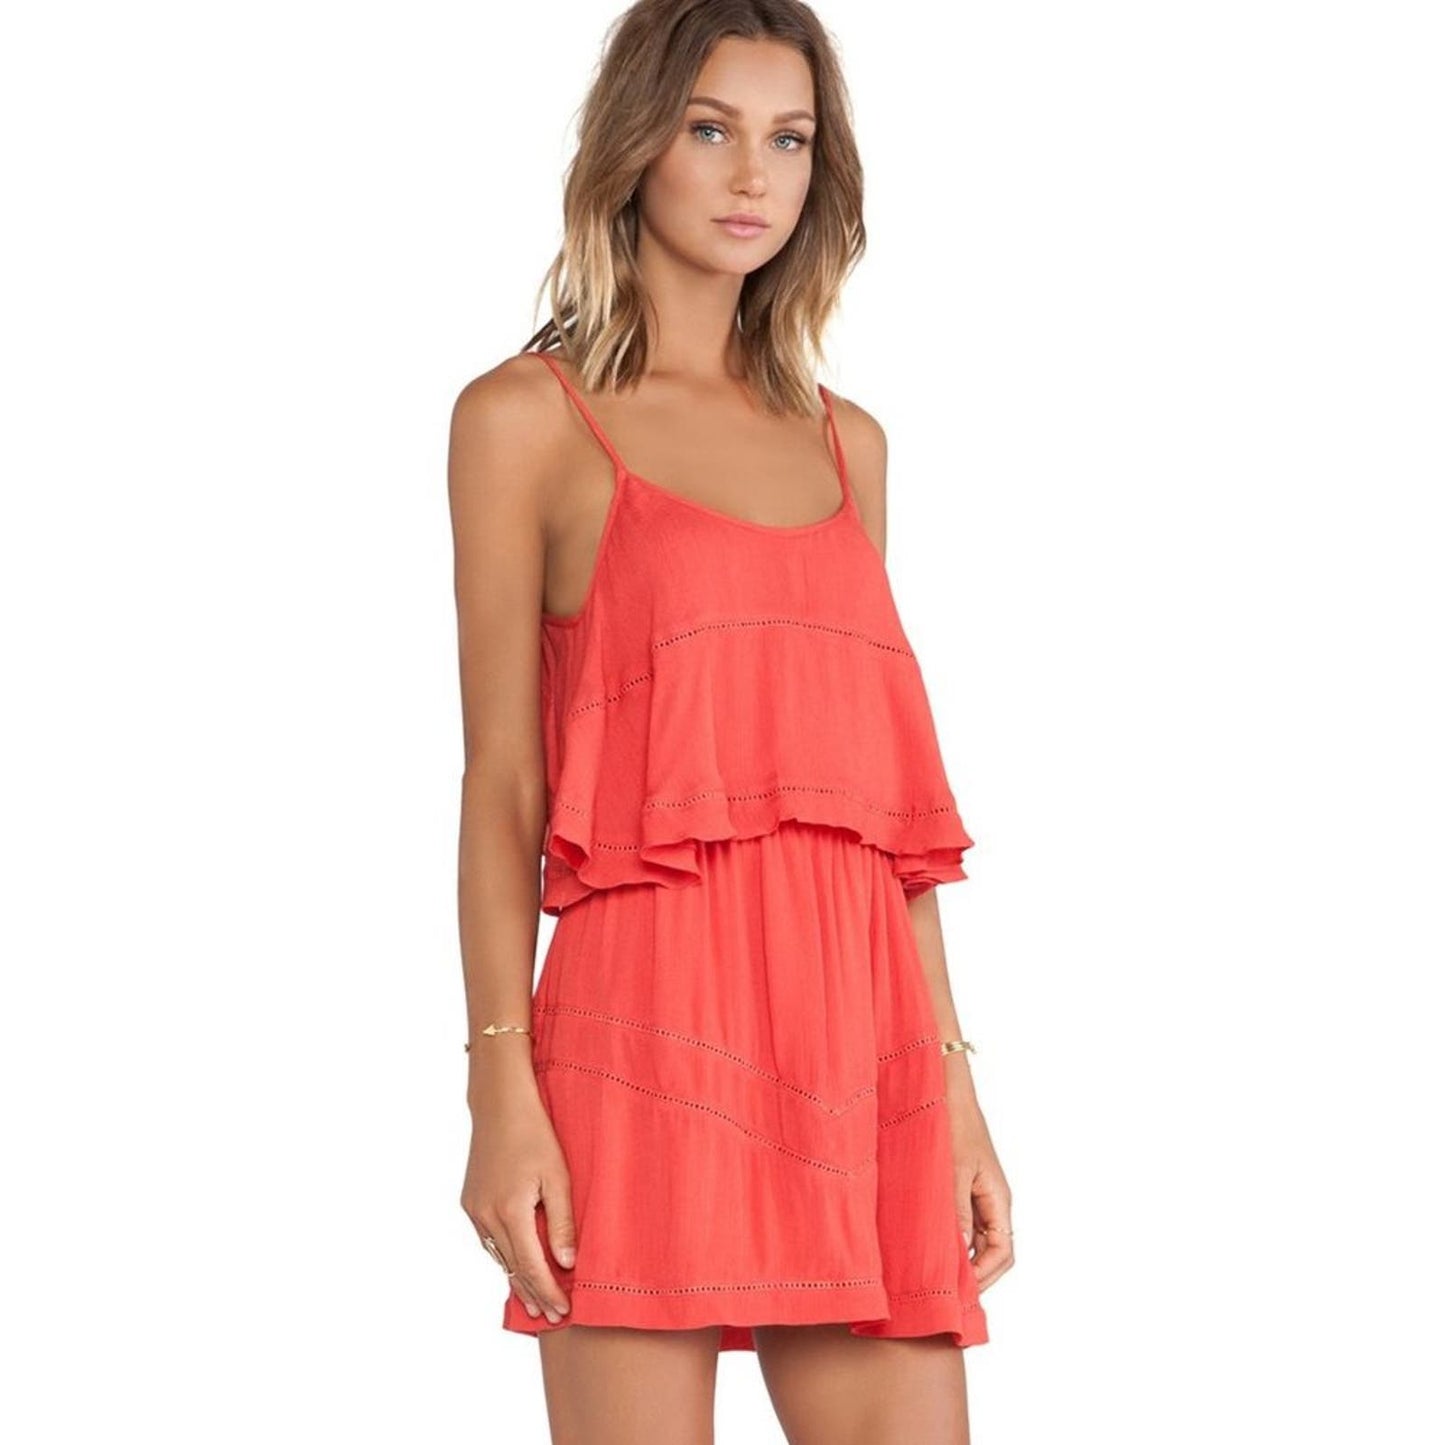 Lovers + Friends Paradise Bay Tiered Mini Dress in Coral NWT XS